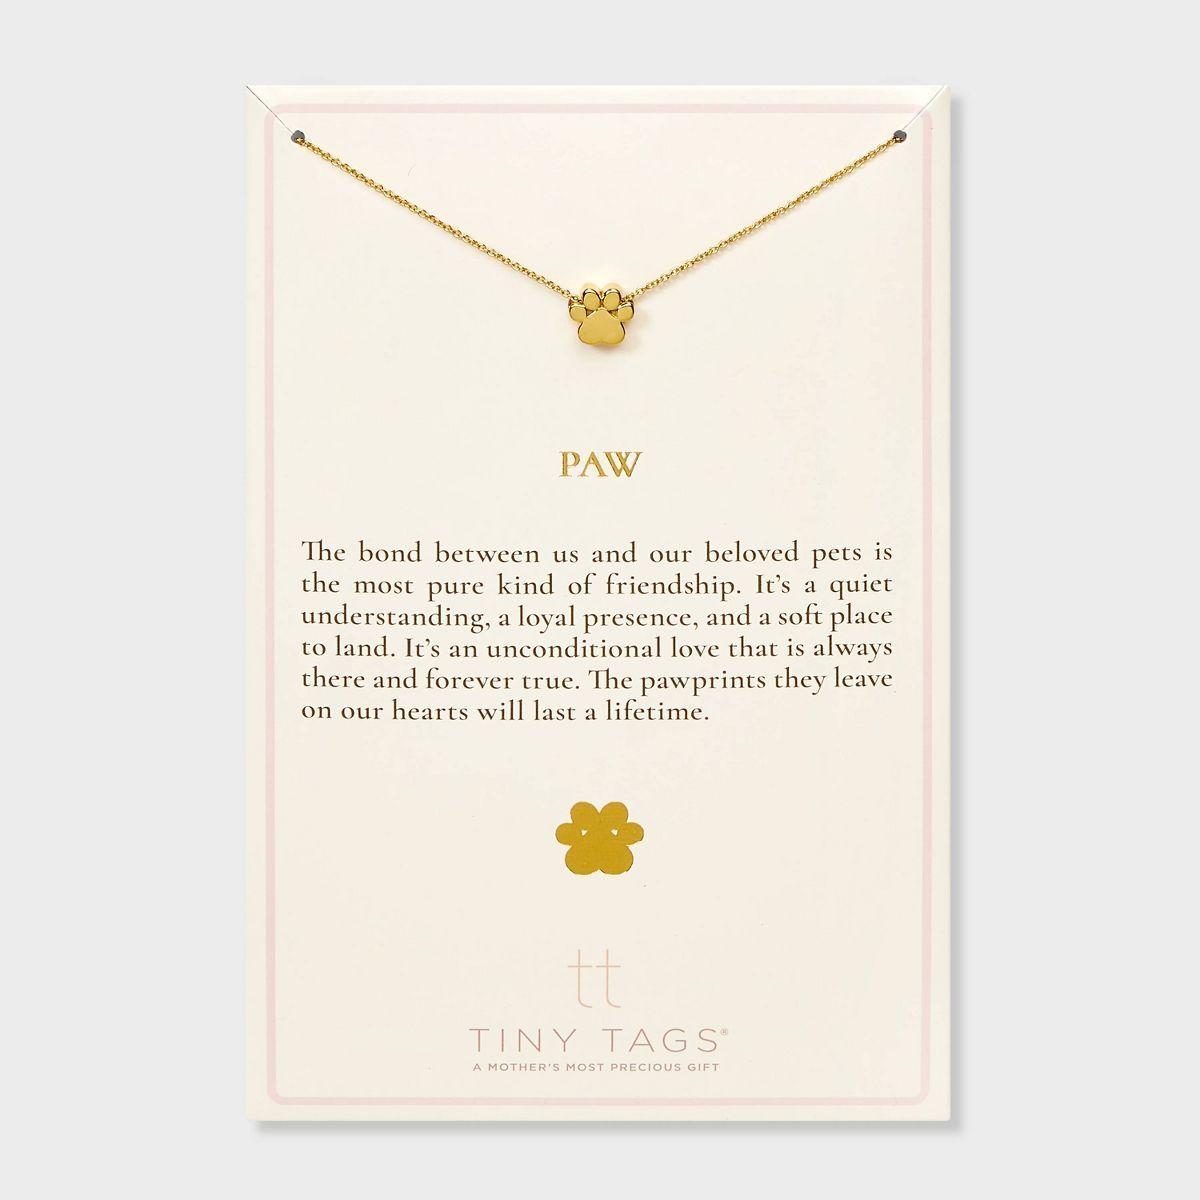 Tiny Tags 14K Gold Ion Plated Paw Chain Necklace - Gold | Target